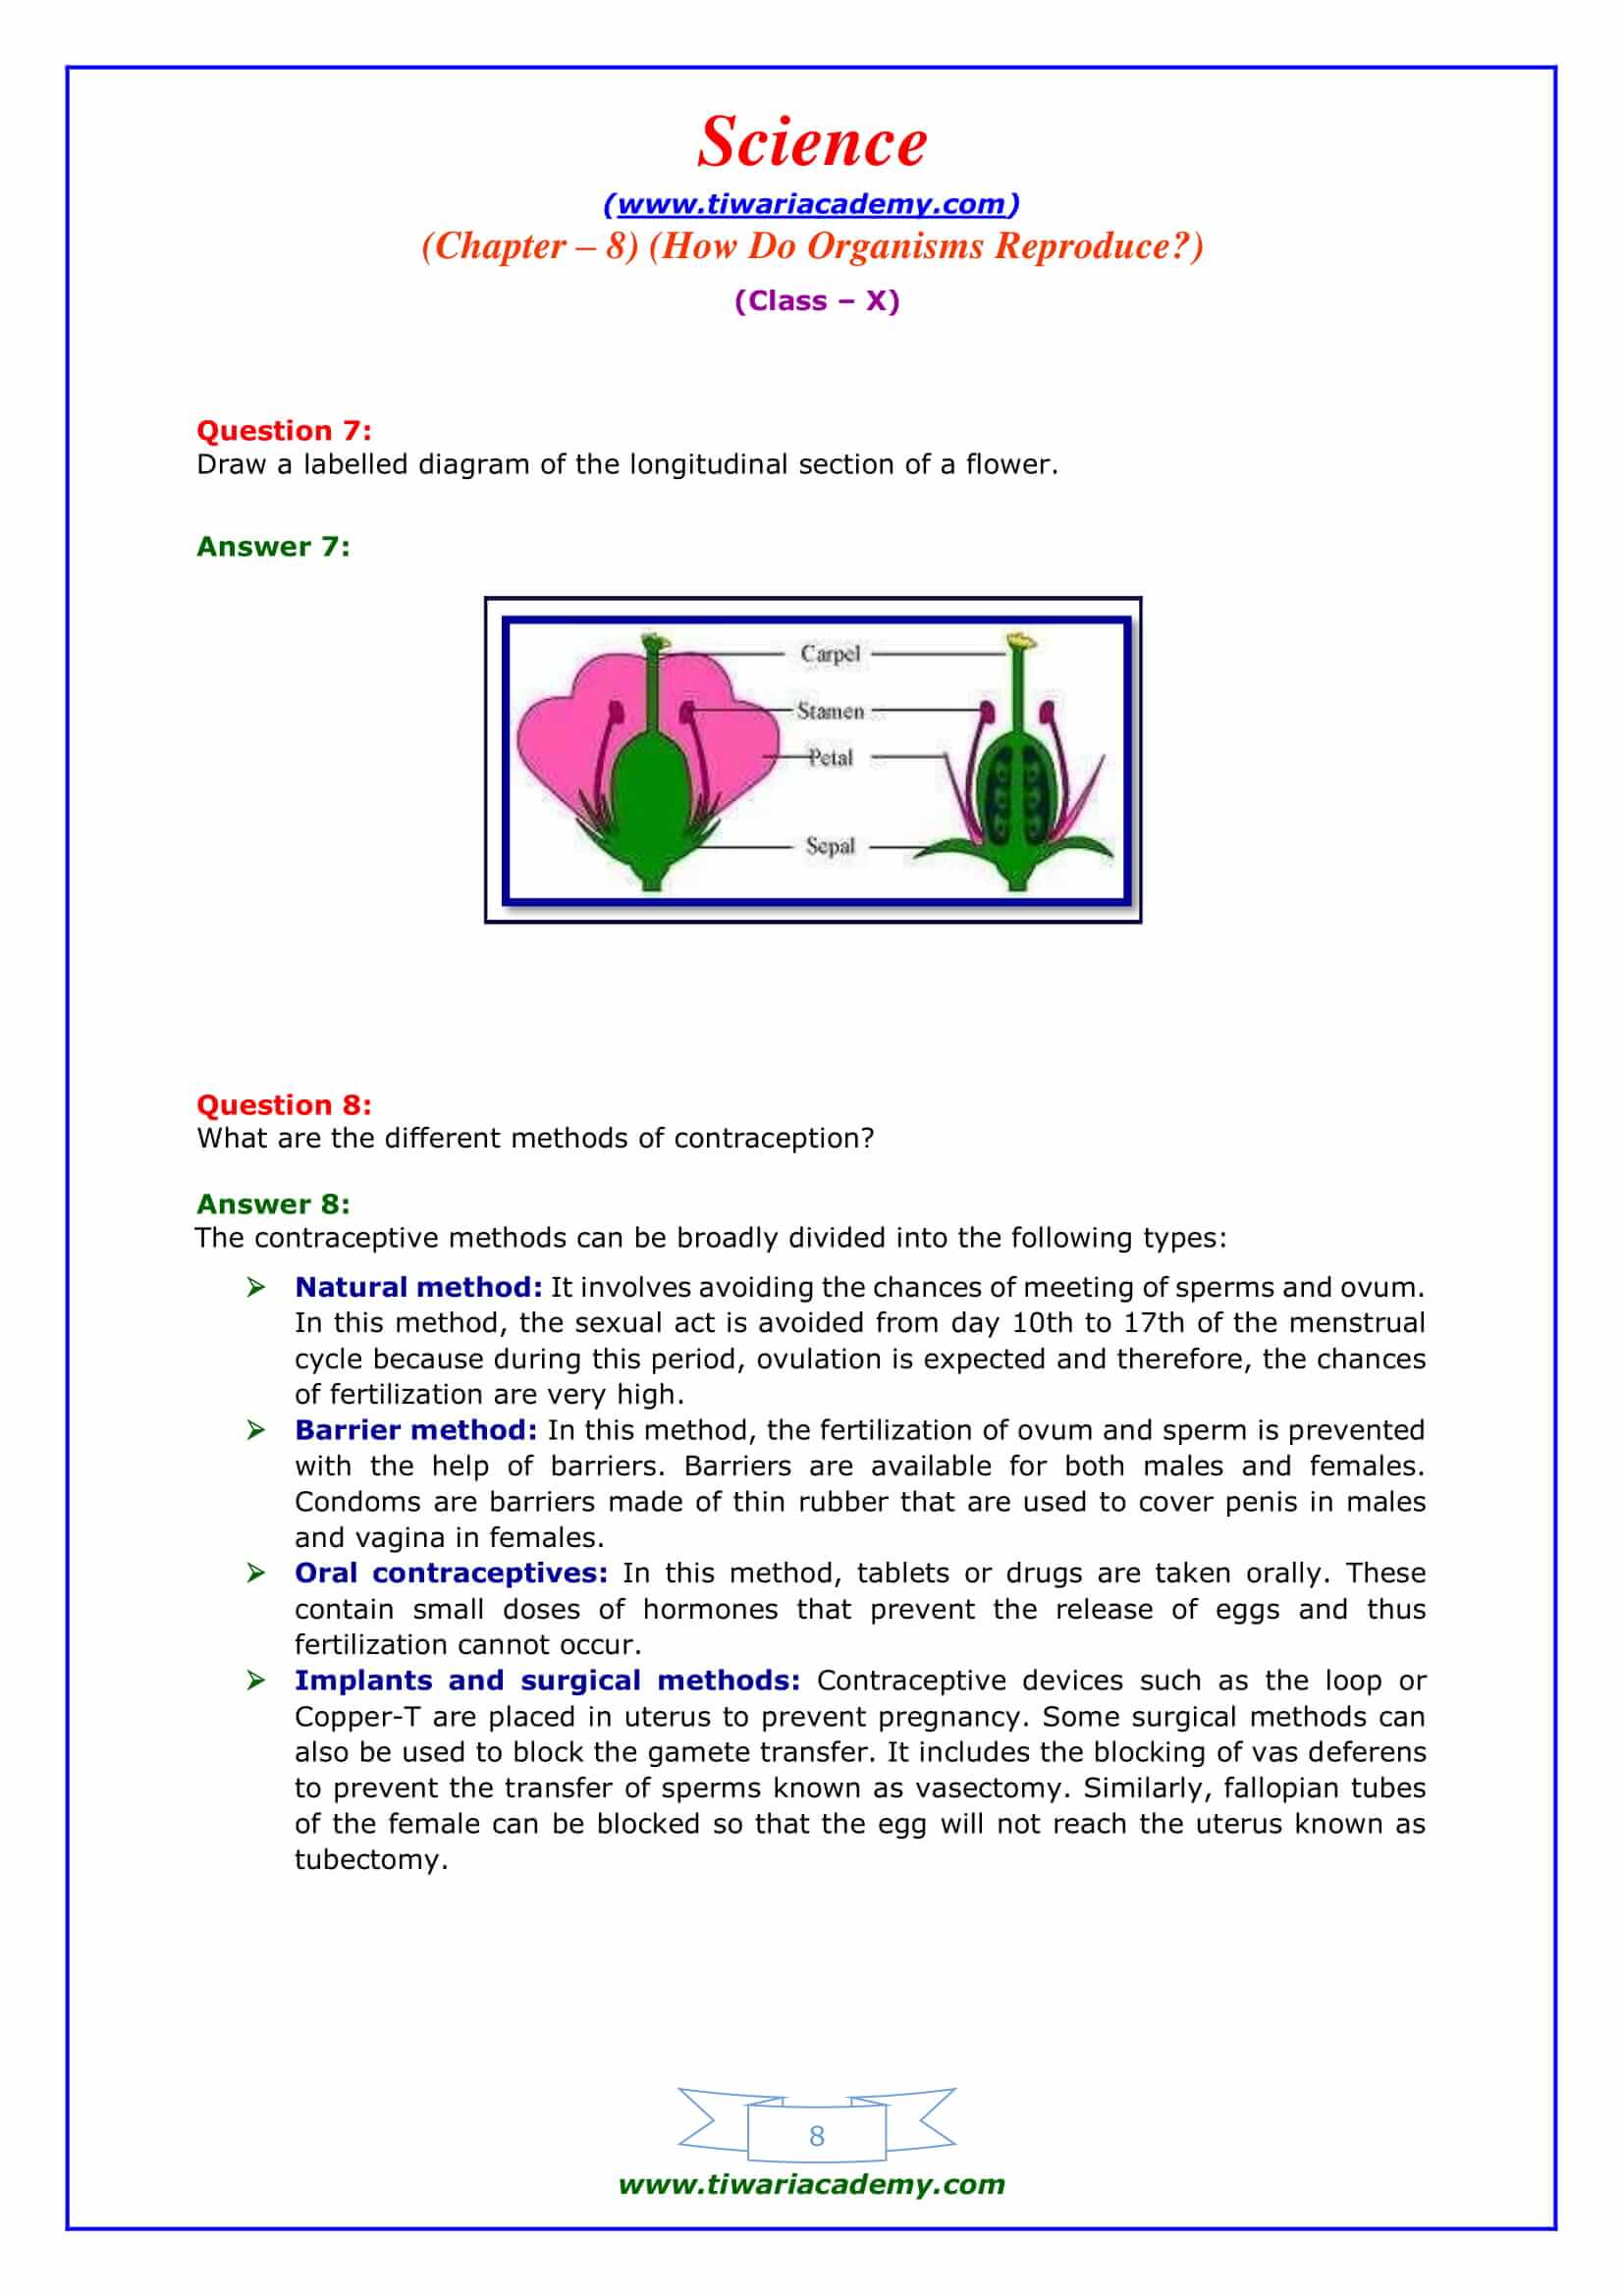 NCERT Solutions for Class 10 Science Chapter 8 in pdf form free